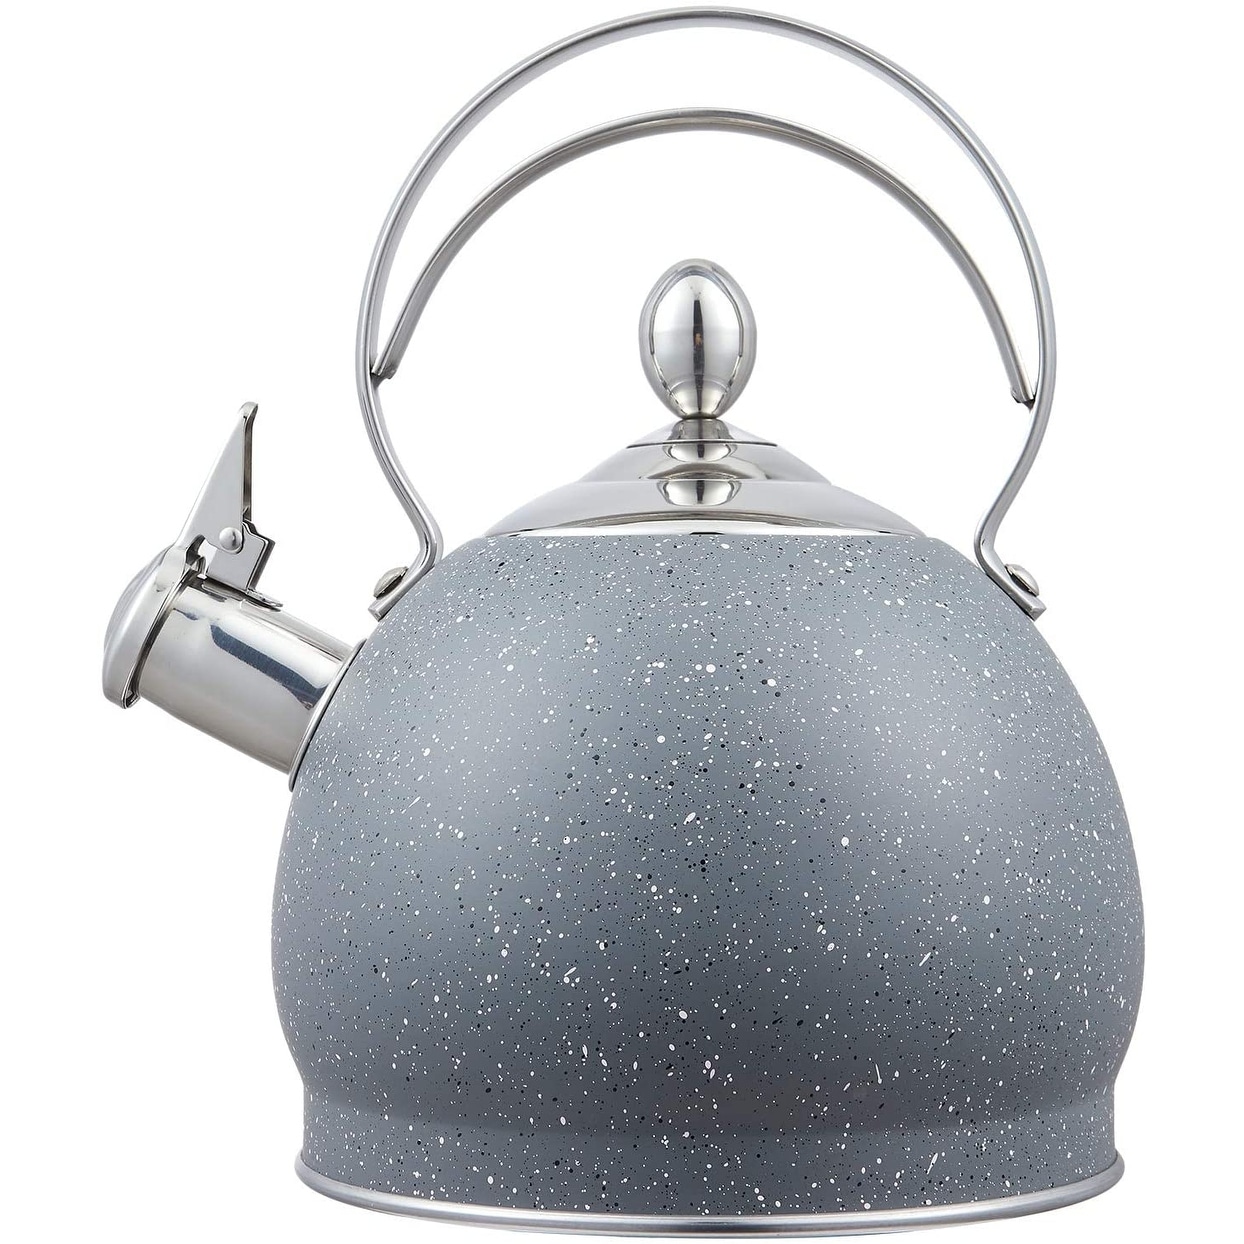 https://ak1.ostkcdn.com/images/products/is/images/direct/89adb87d8c97bb78d1aae98717889fe186d7f5b9/Creative-Home-2.5-Qt.-Stainless-Steel-Whistling-Tea-Kettle%2C-Opaque-Gray.jpg